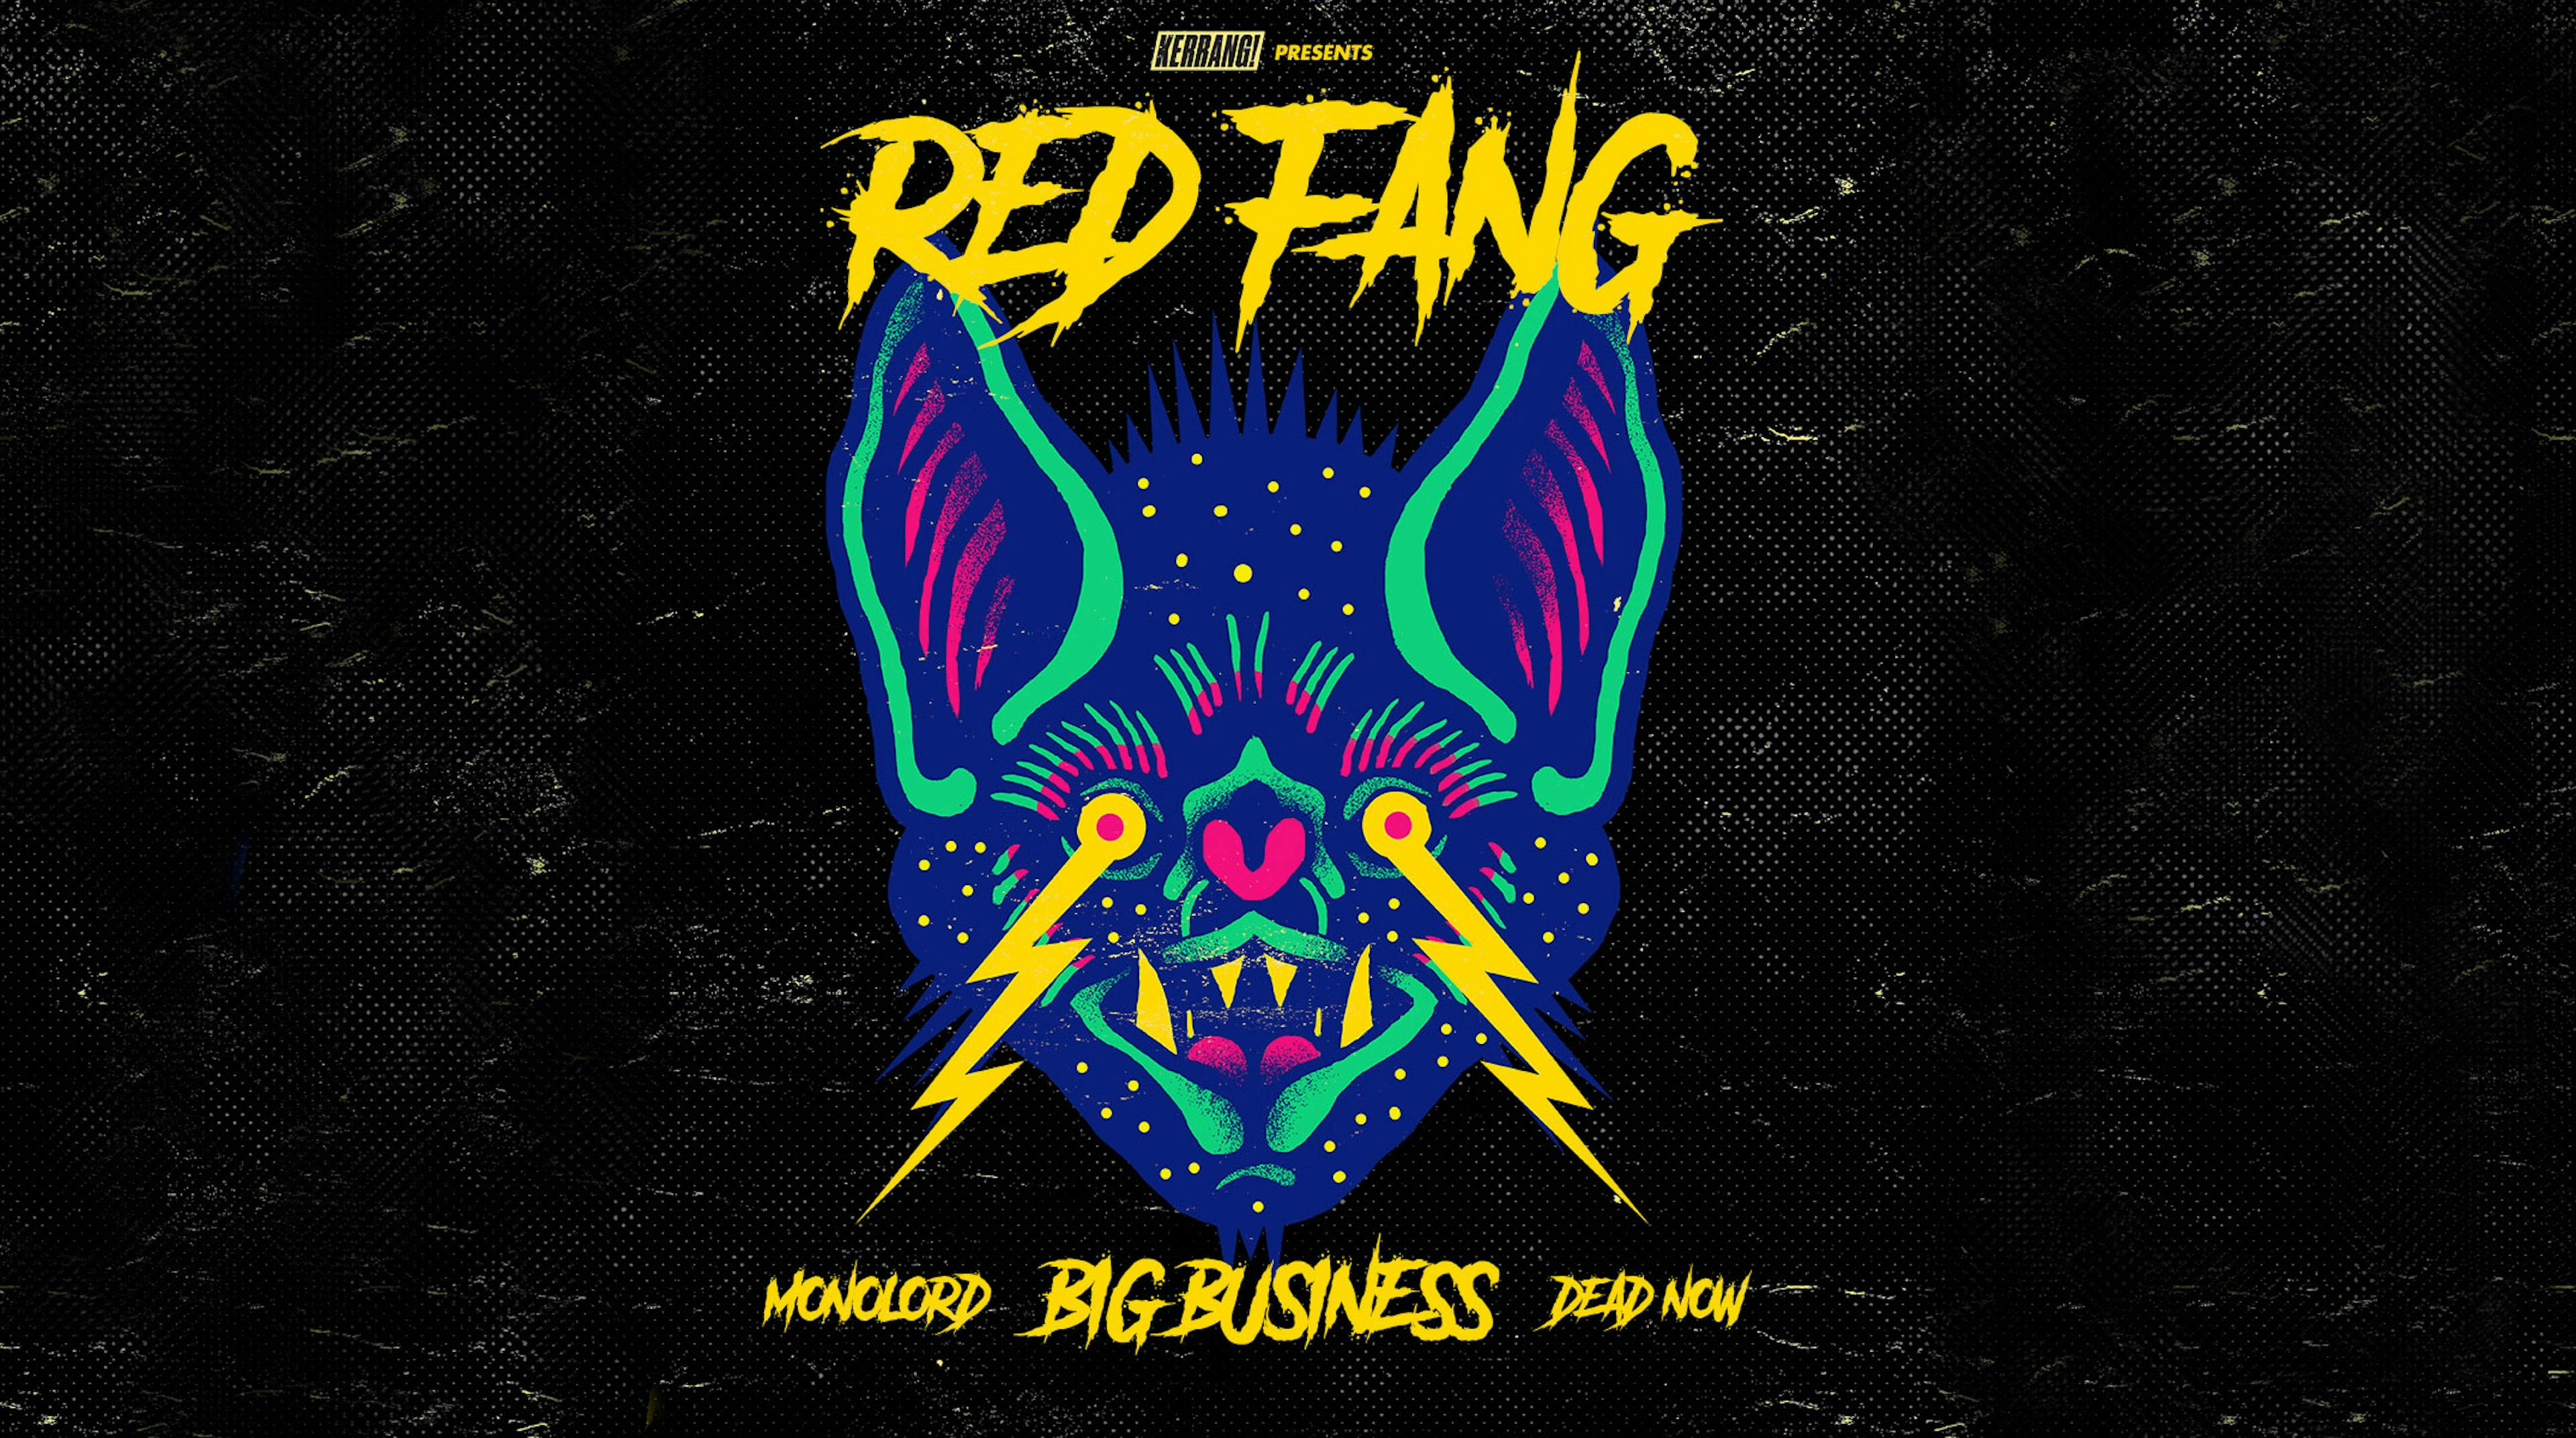 Win Two Free Tickets To See Red Fang This September!